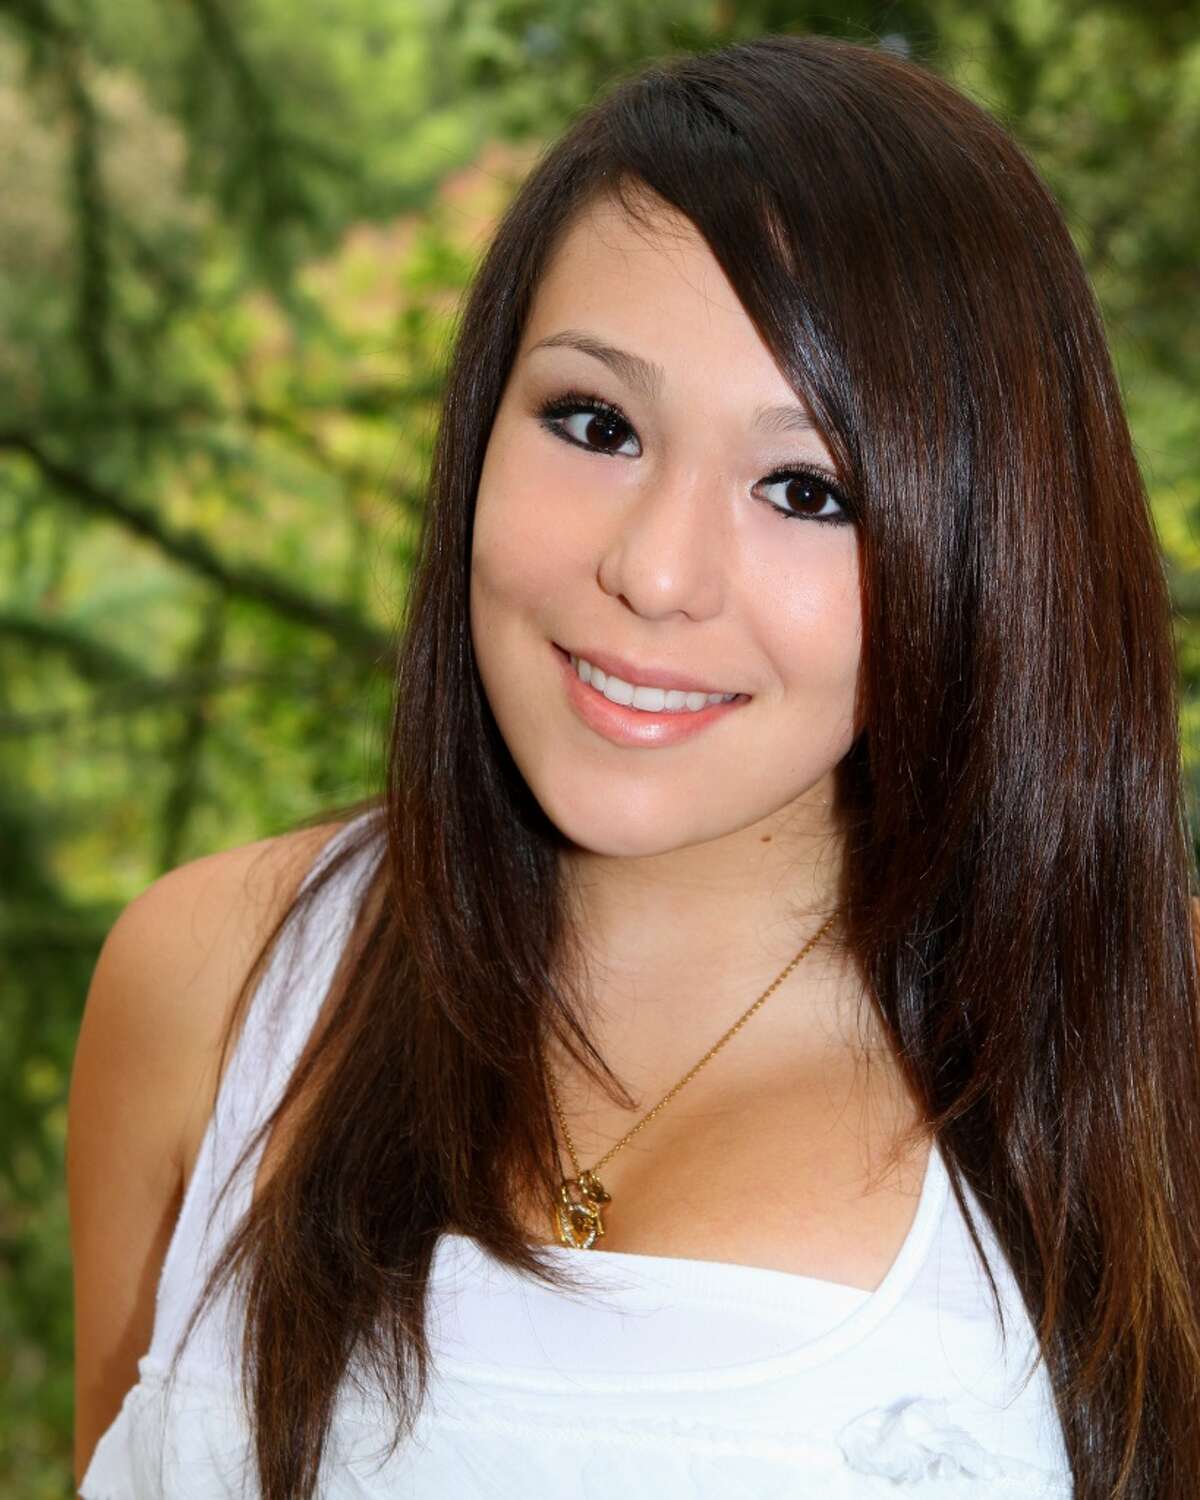 Photo of Audrie Pott provided by the Pott family.